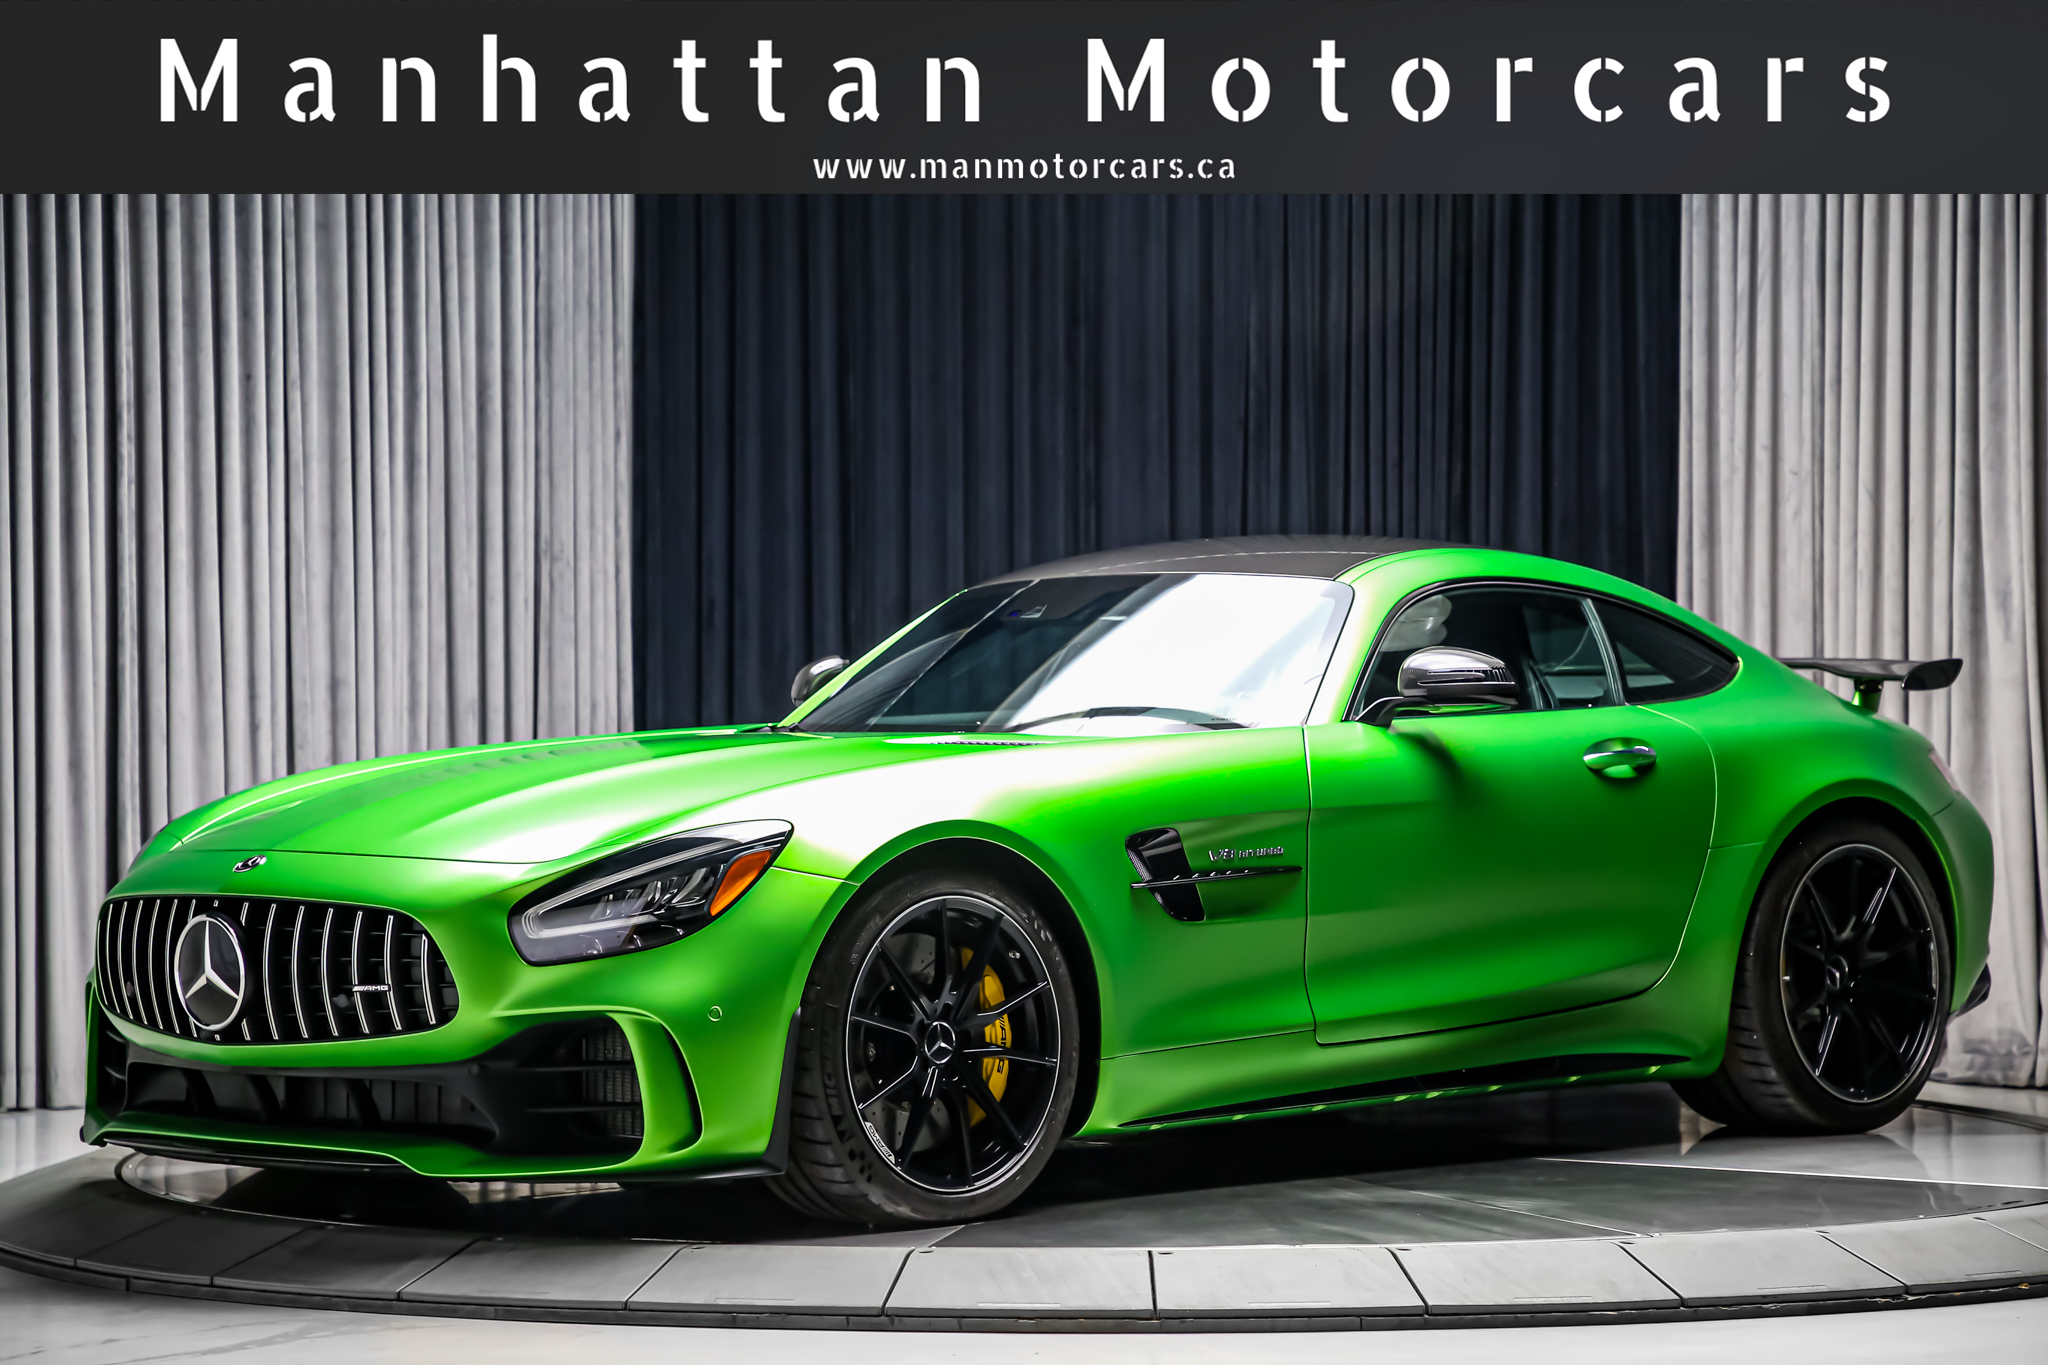 2020 Mercedes-Benz AMG GT AMG GT R 577HP |ALMOST NEW|TITANIUMEXHAUST|CARBON